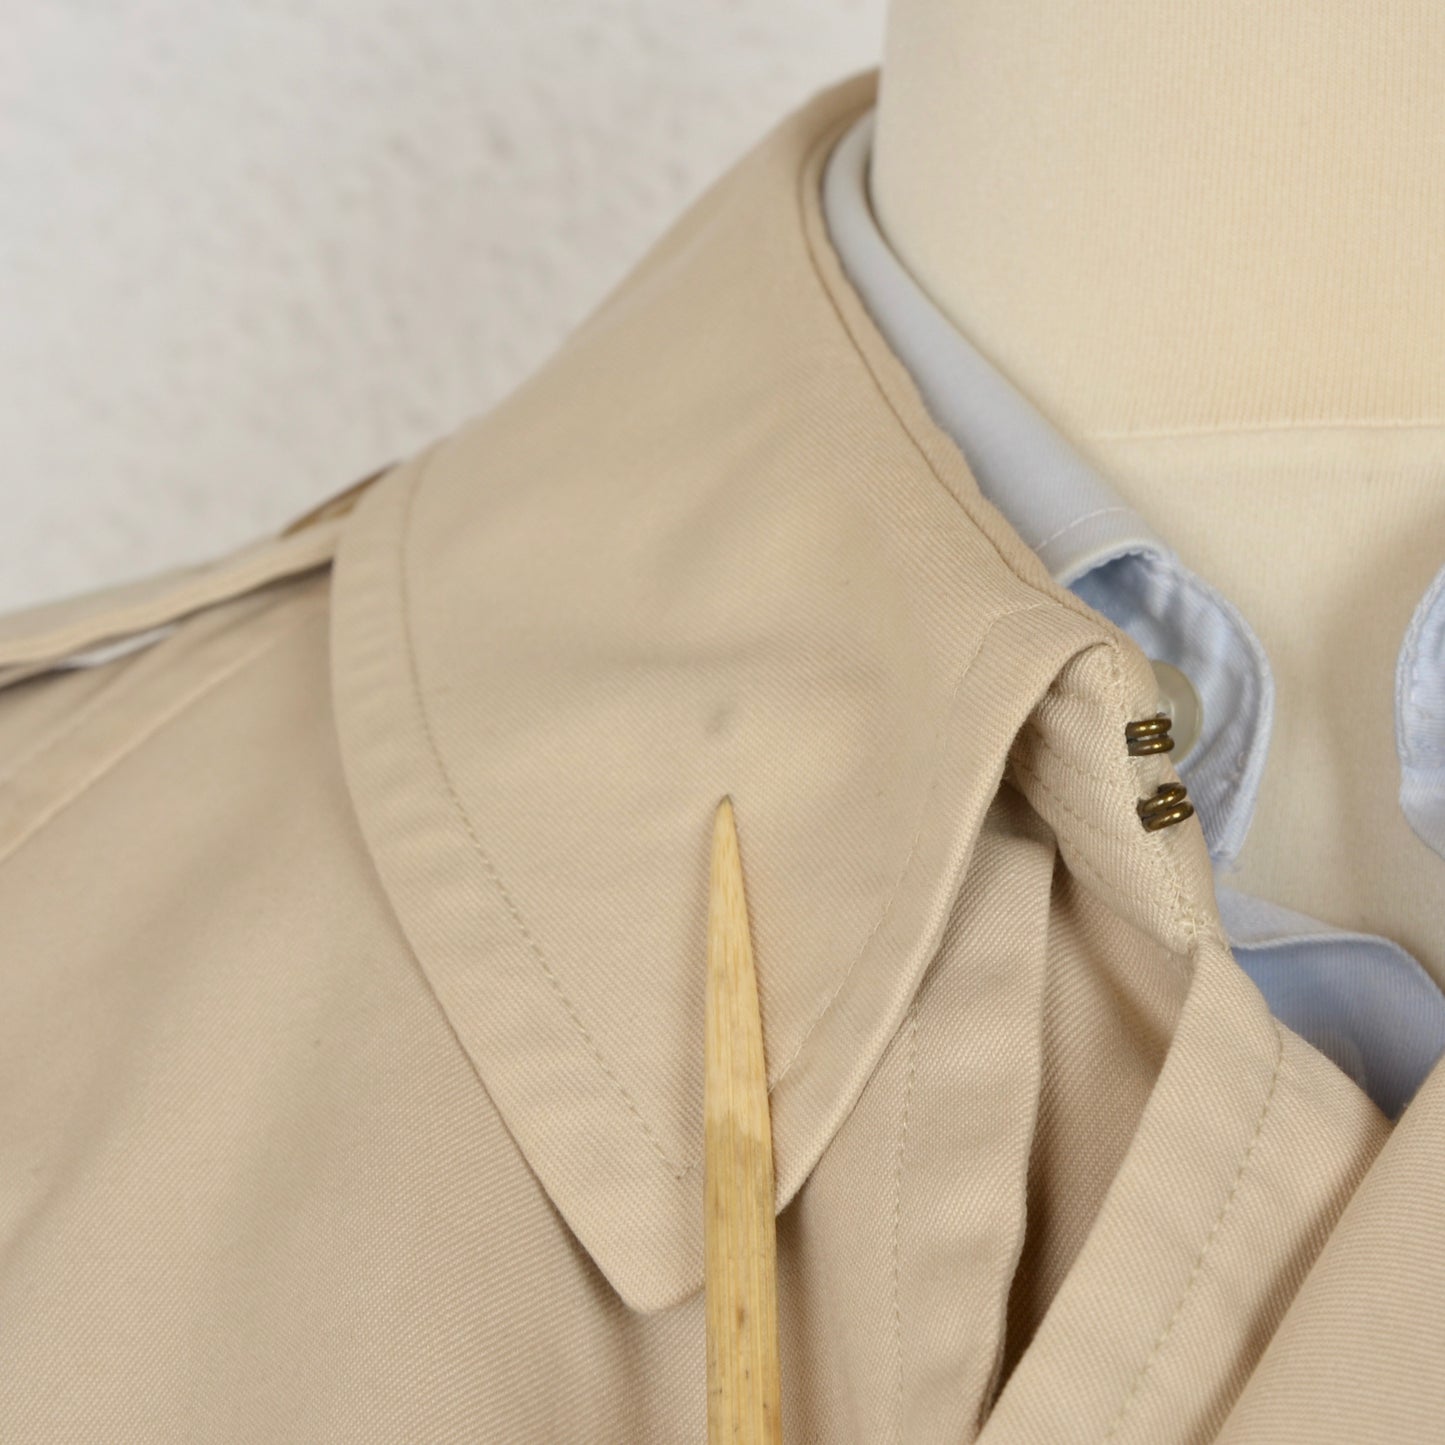 Vintage Burberry Double-Breasted Trench Size 44 - Beige